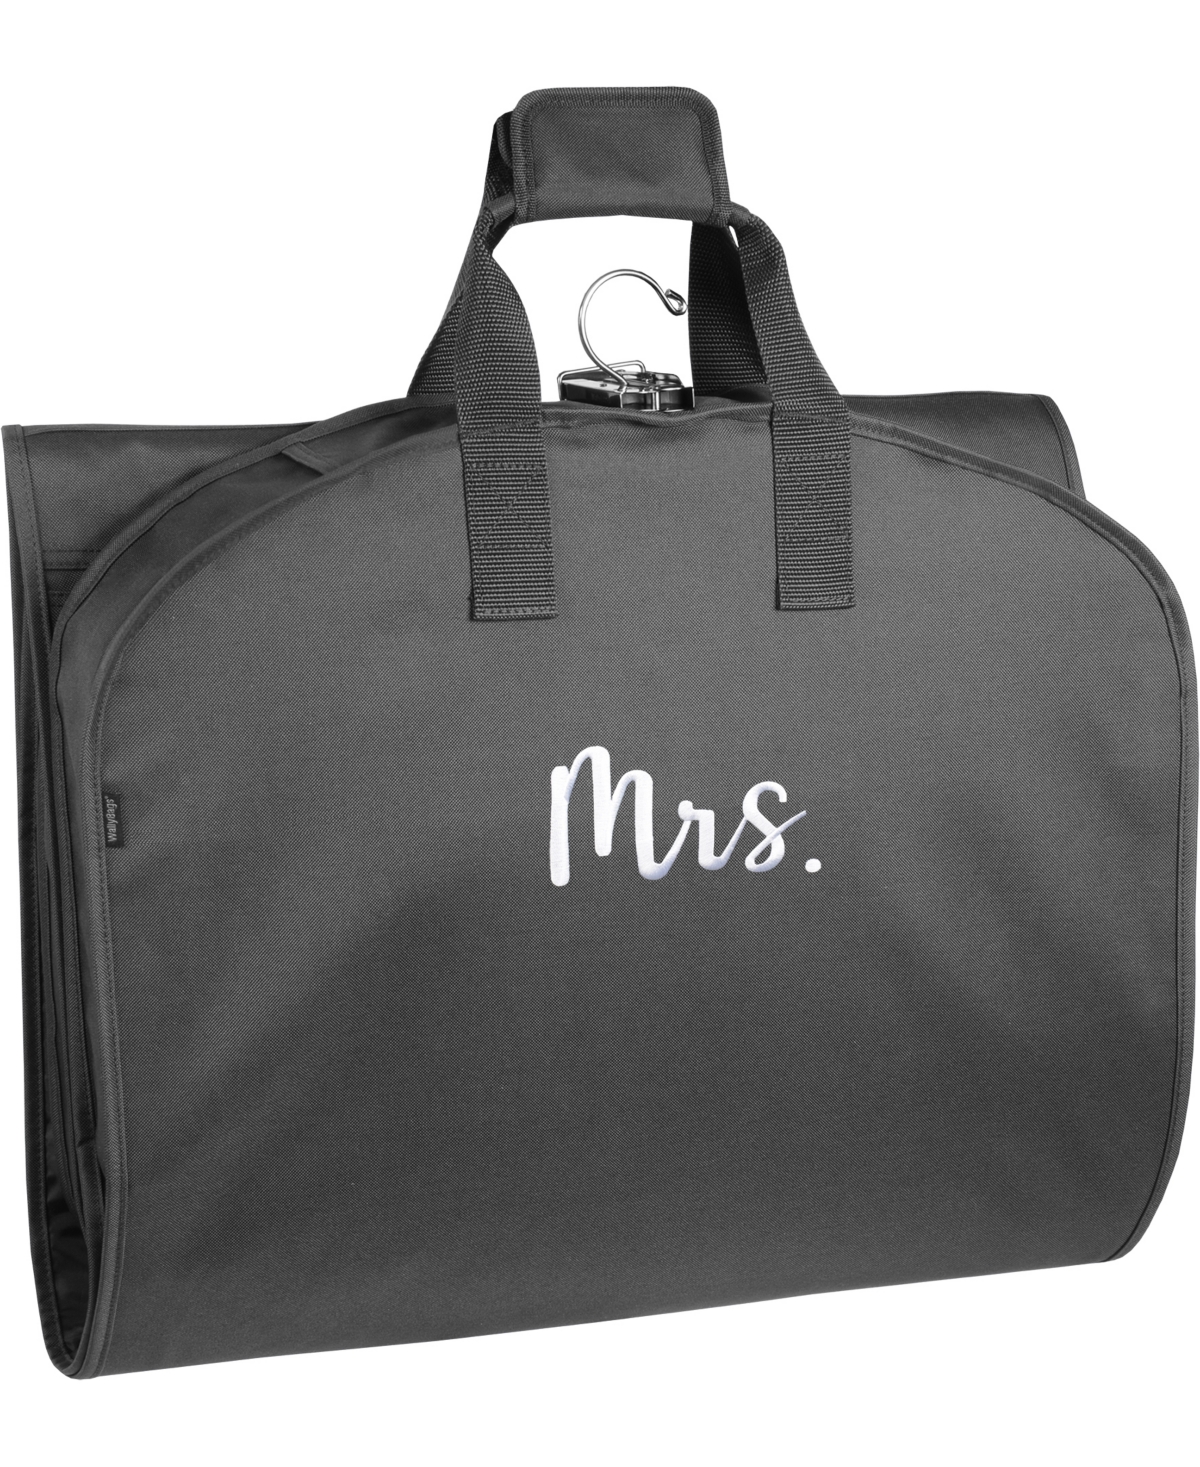 60" Premium Tri-Fold Travel Garment Bag with Pocket and Mrs. Embroidery - Black - M Gold